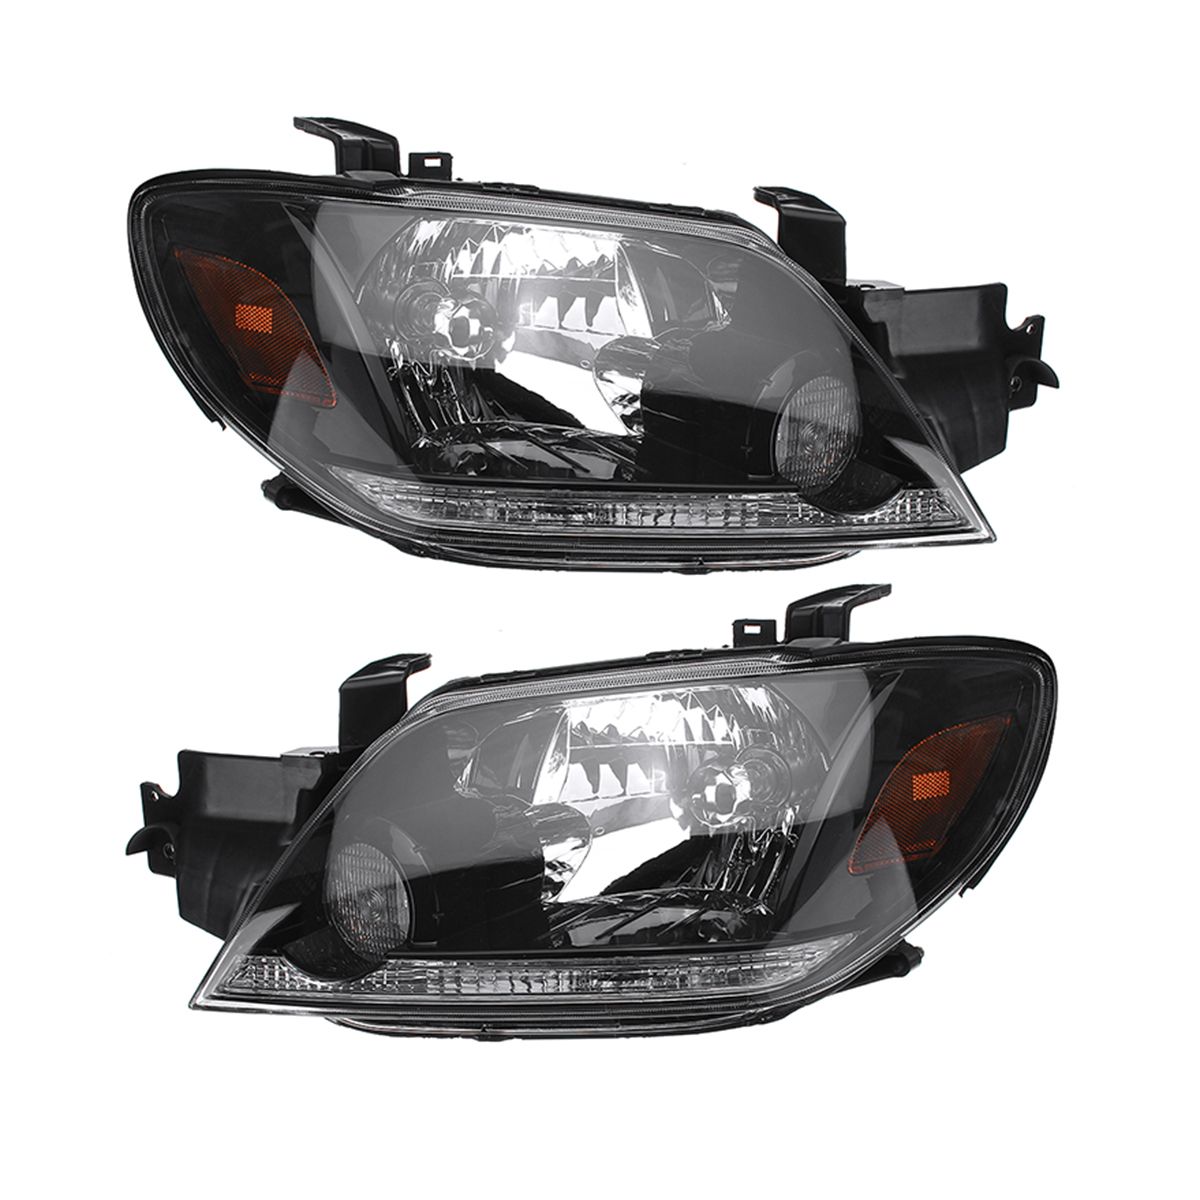 Pair-Left--Right-Front-Head-Light-Lamp-LED-Headlights-For-Mitsubishi-Outlander-2003-2006-1619603